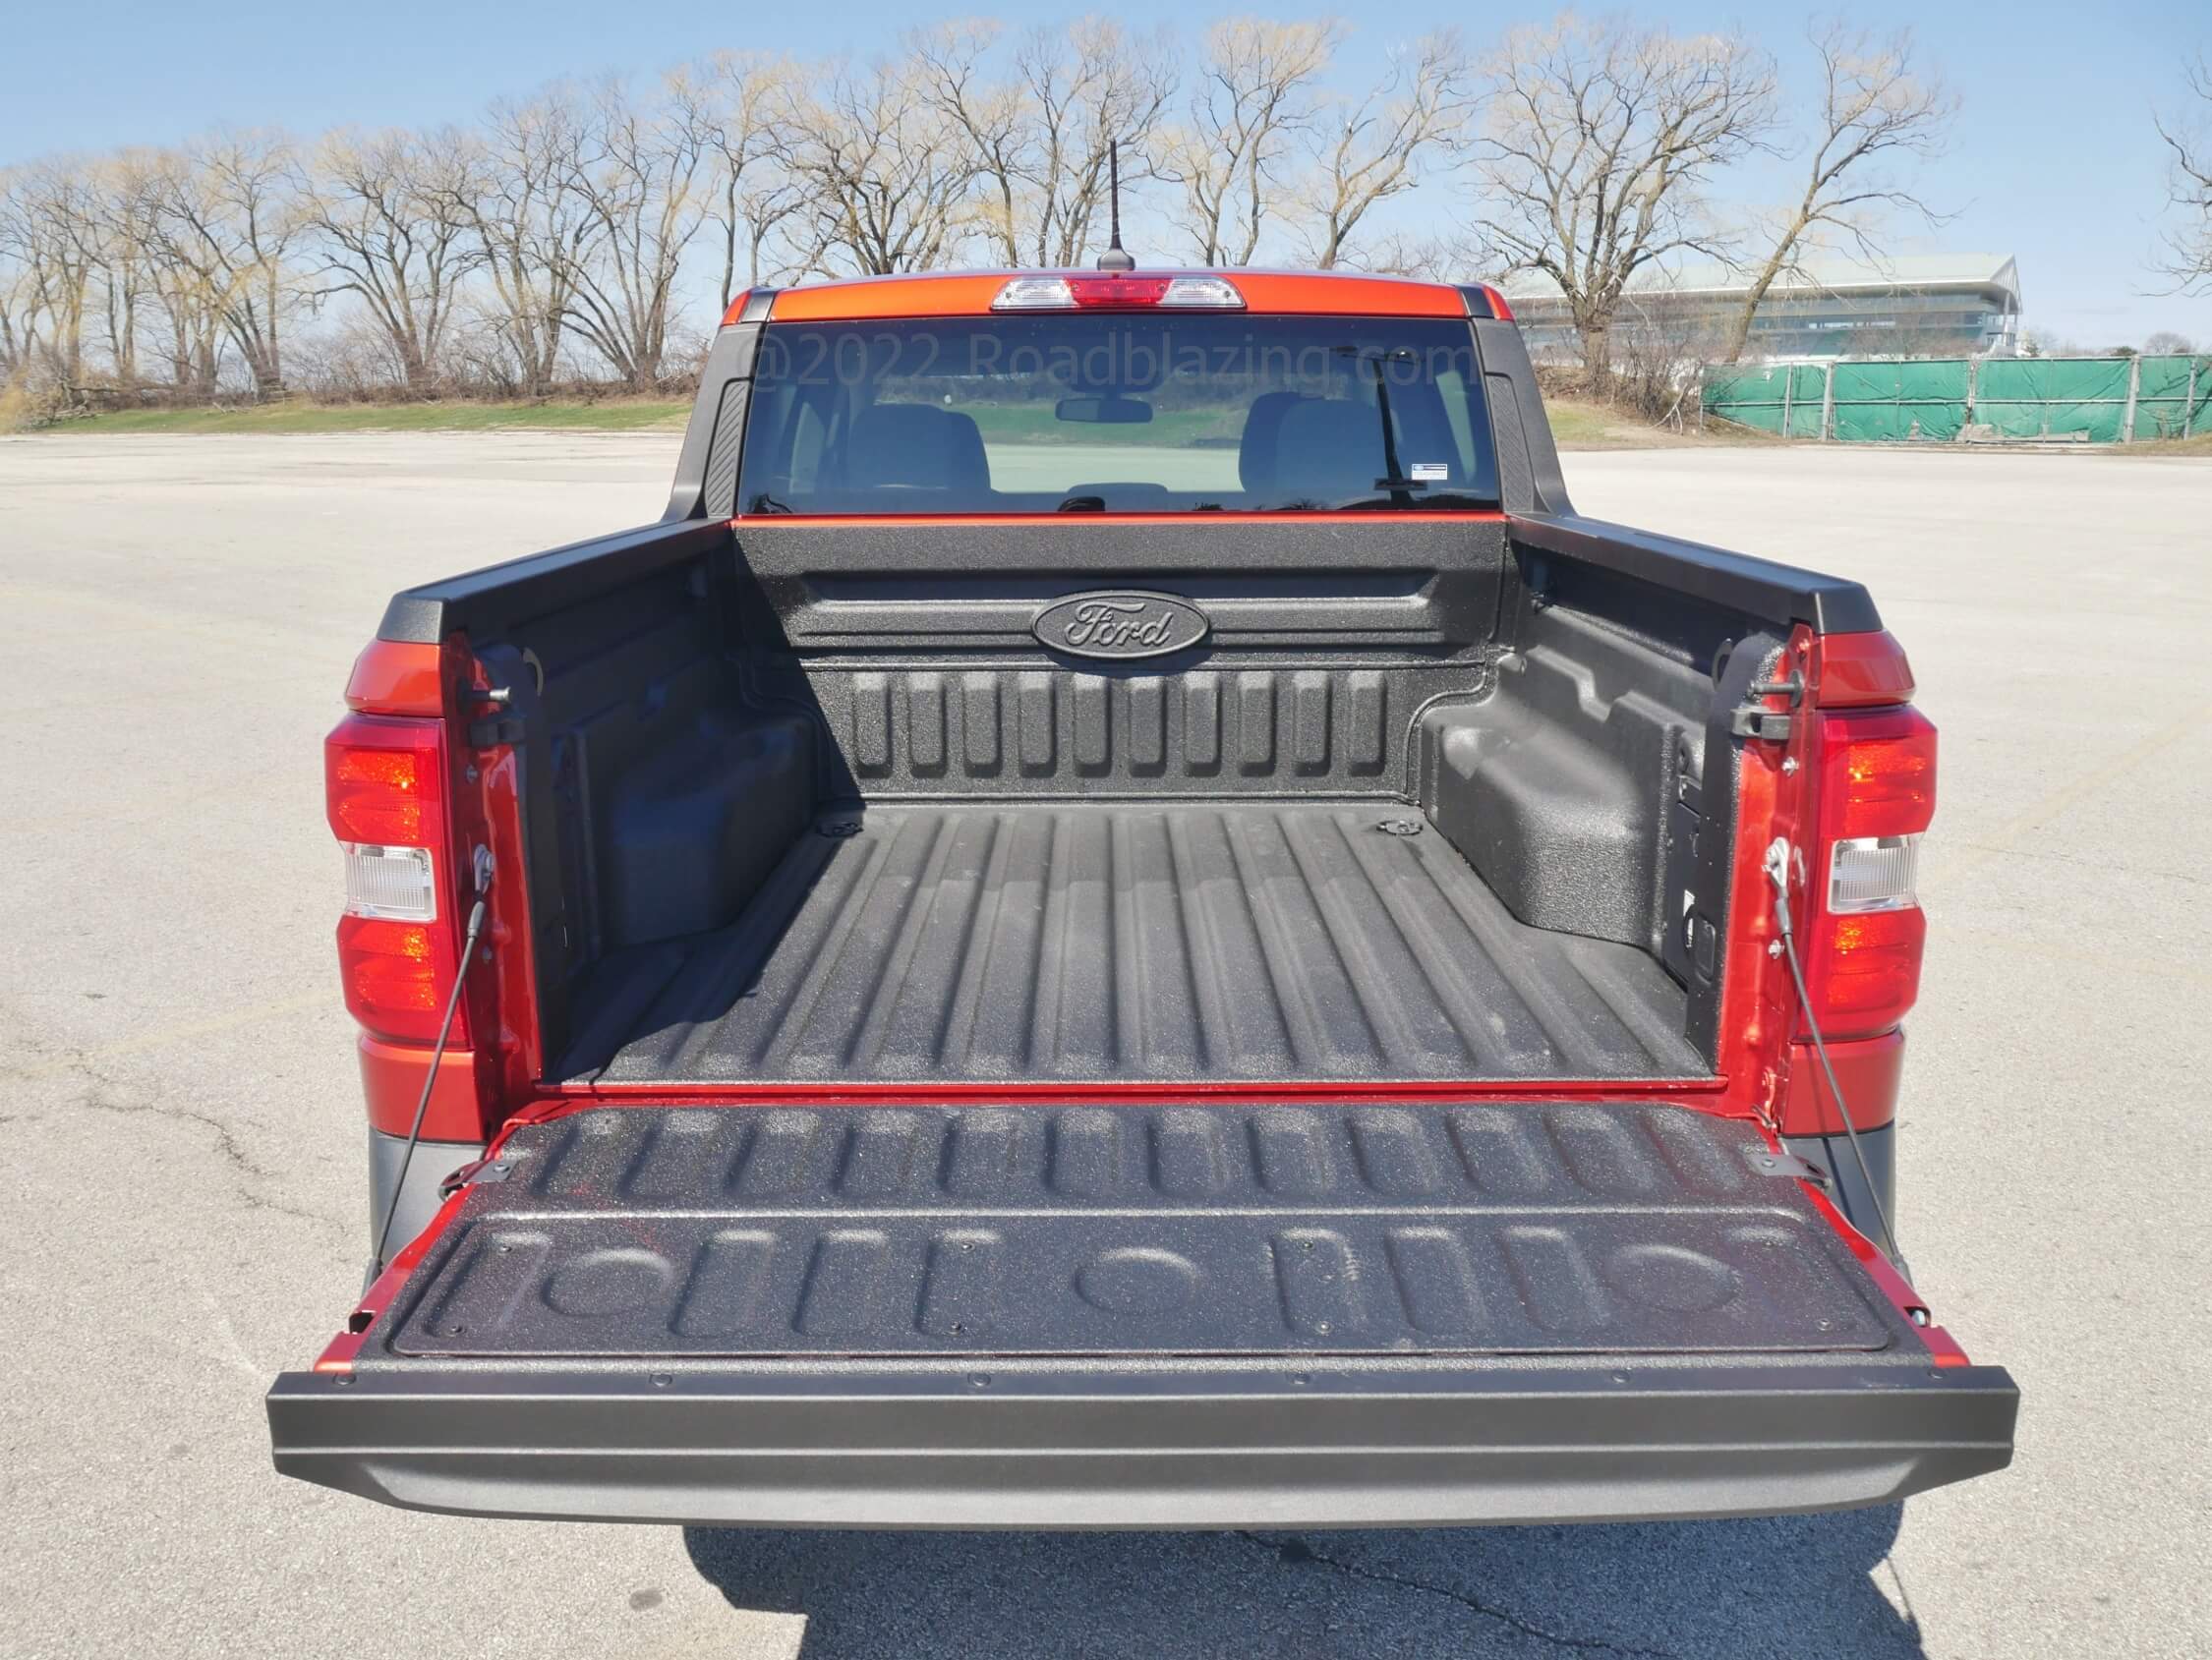 2022 Ford Maverick XLT 2.5L Hybrid: low loading bed with available crinkle finish spray in liner